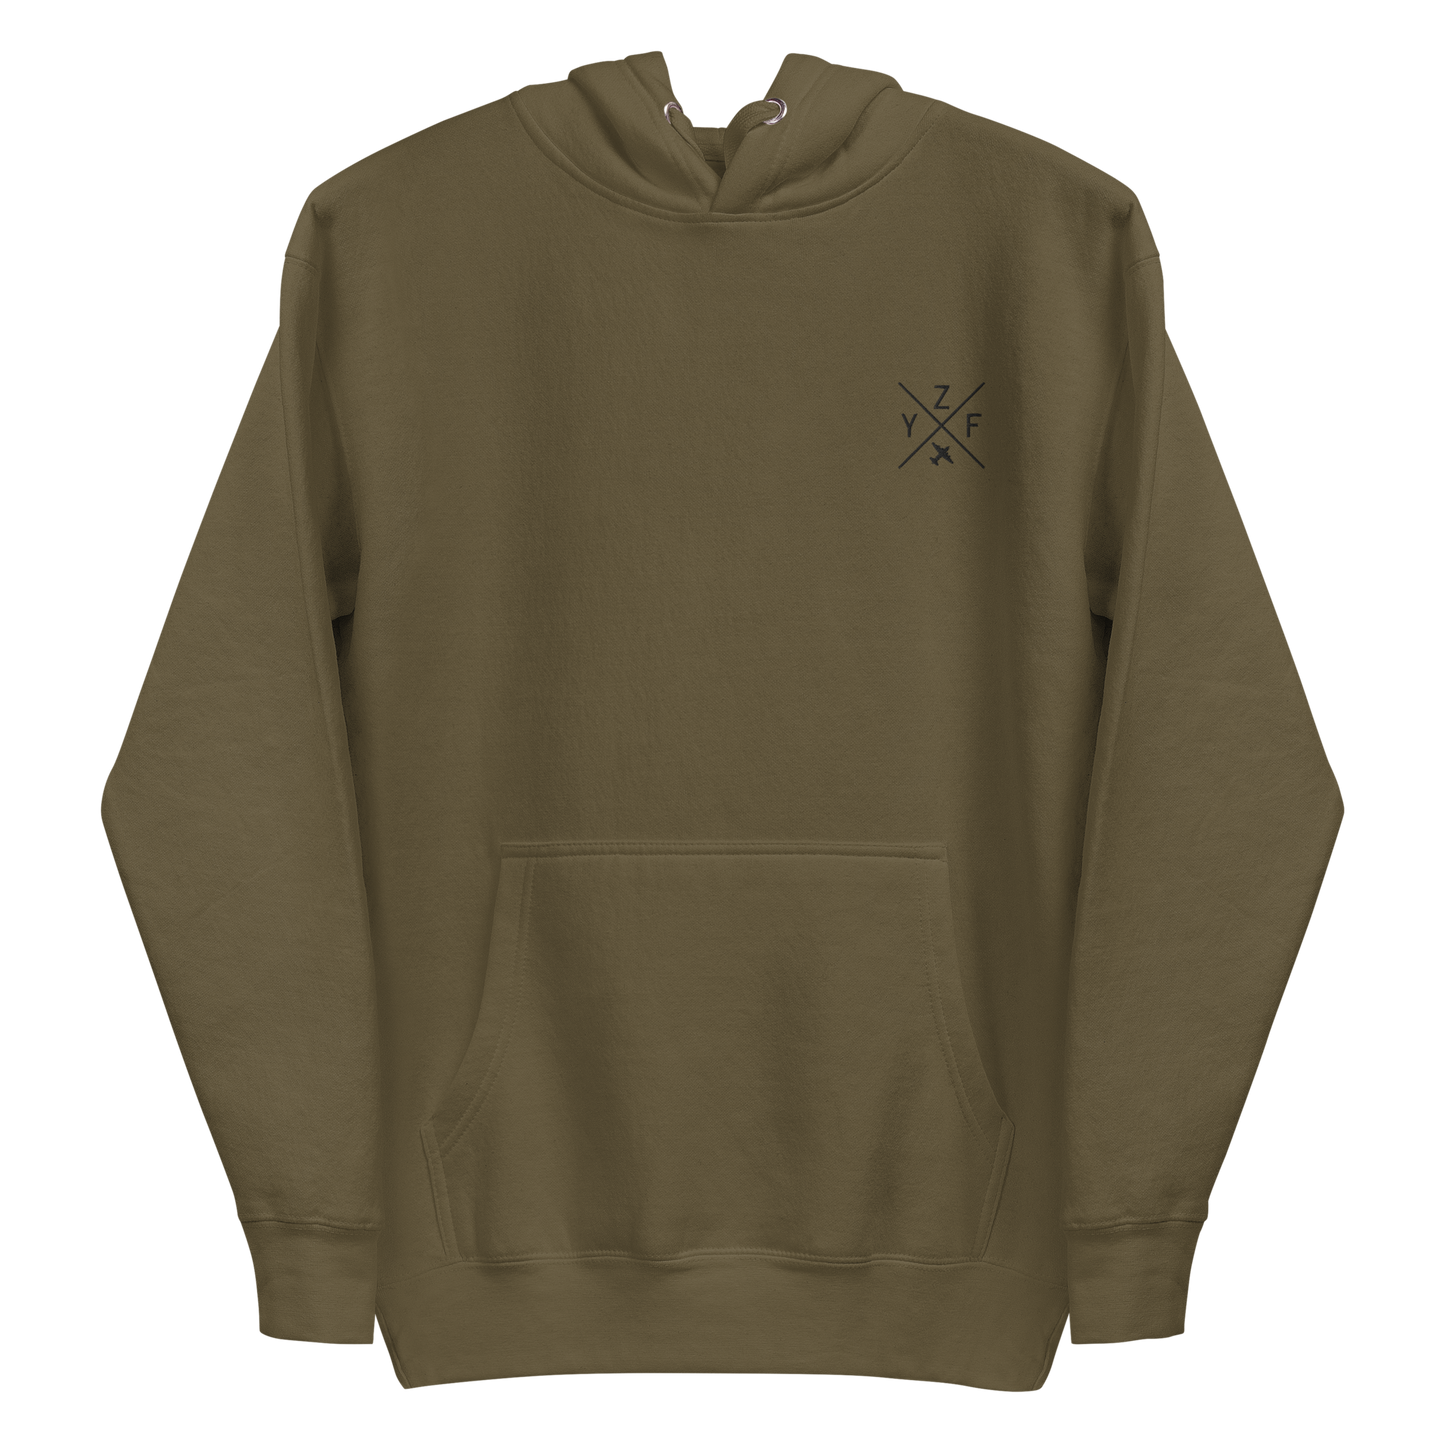 YHM Designs - YZF Yellowknife Premium Hoodie - Crossed-X Design with Airport Code and Vintage Propliner - Black Embroidery - Image 06